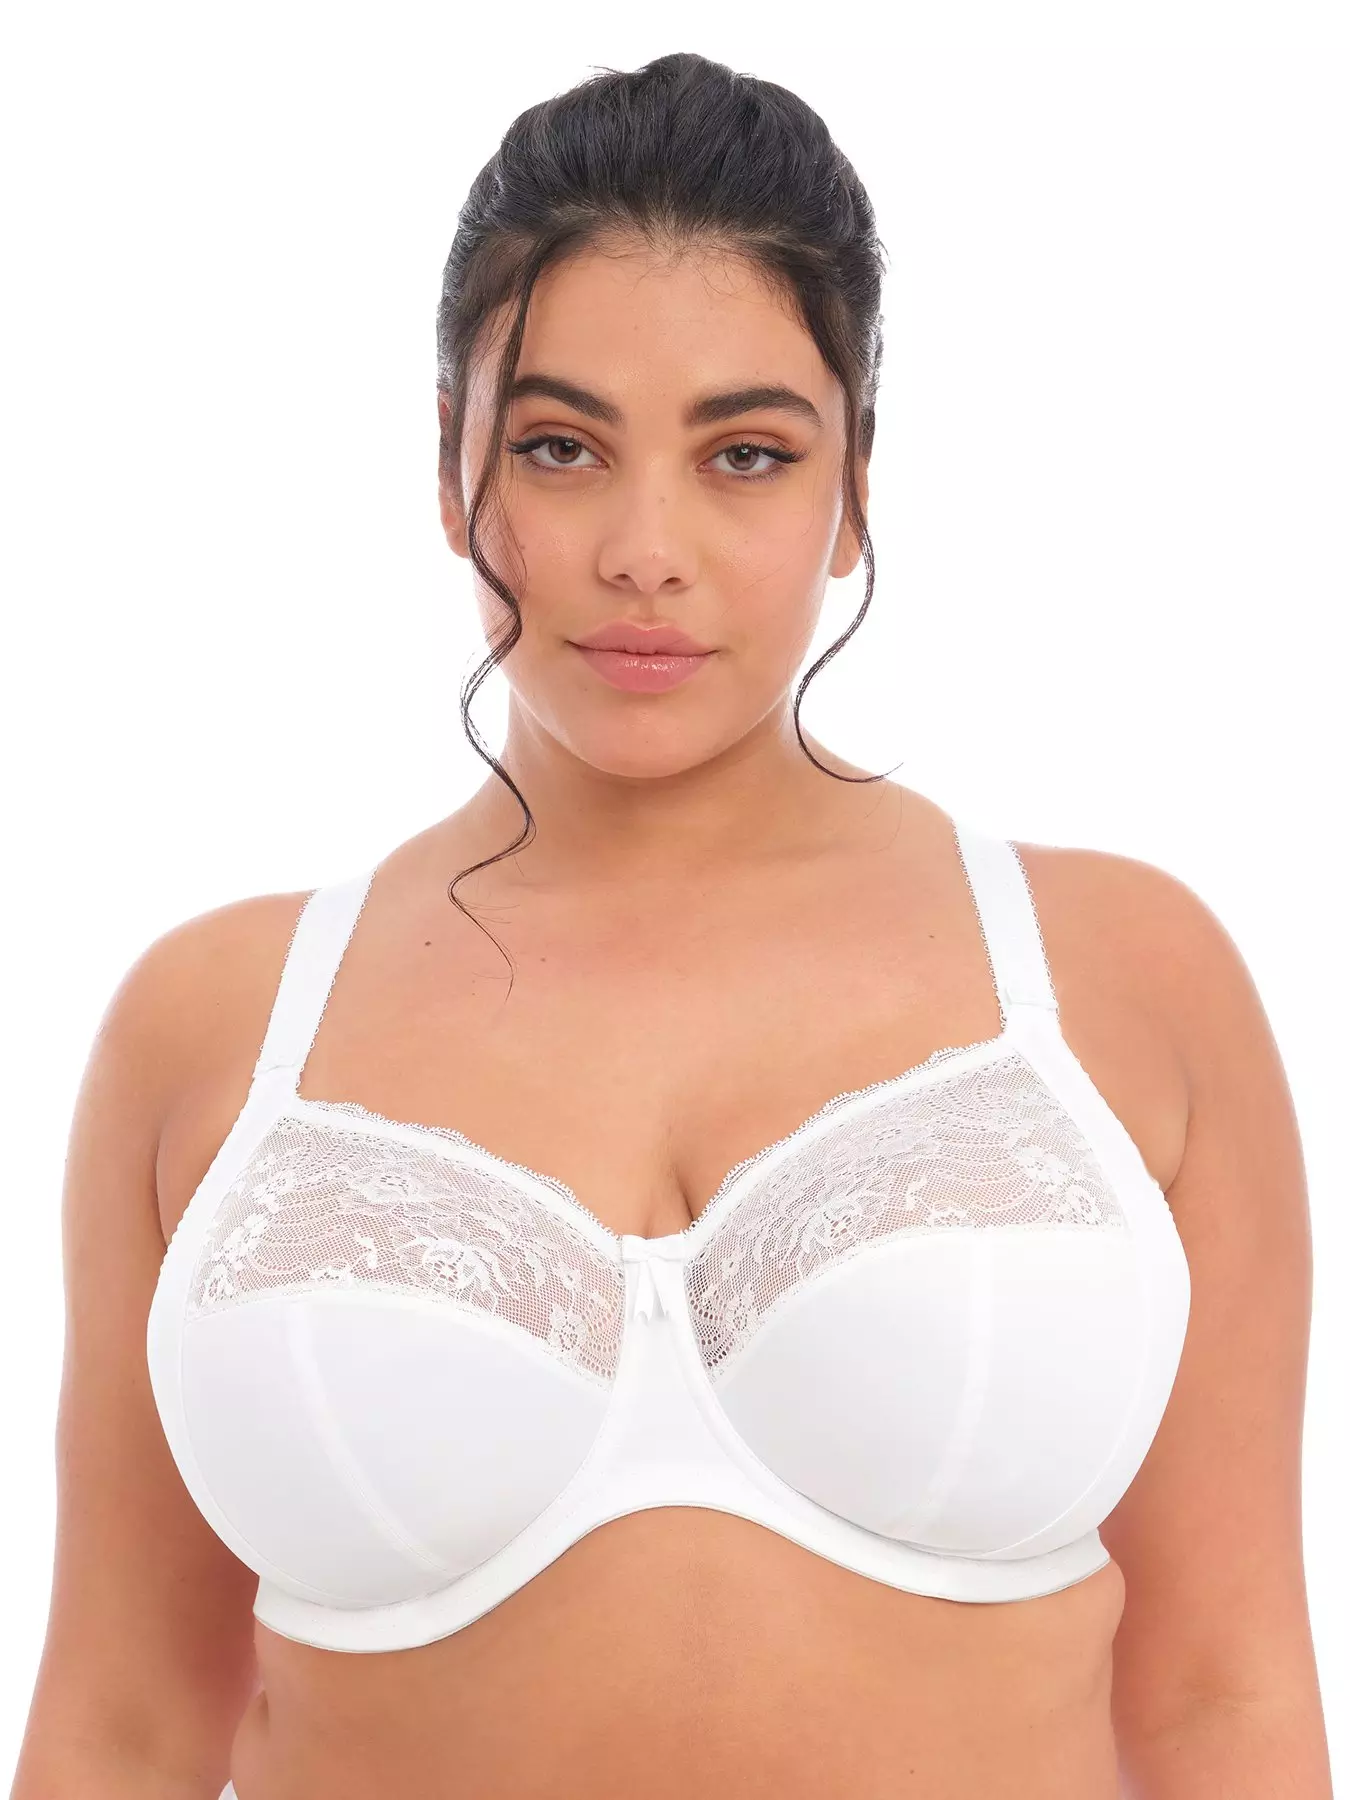 Rive Gauche Passion Half Cup Bra - For Her from The Luxe Company UK